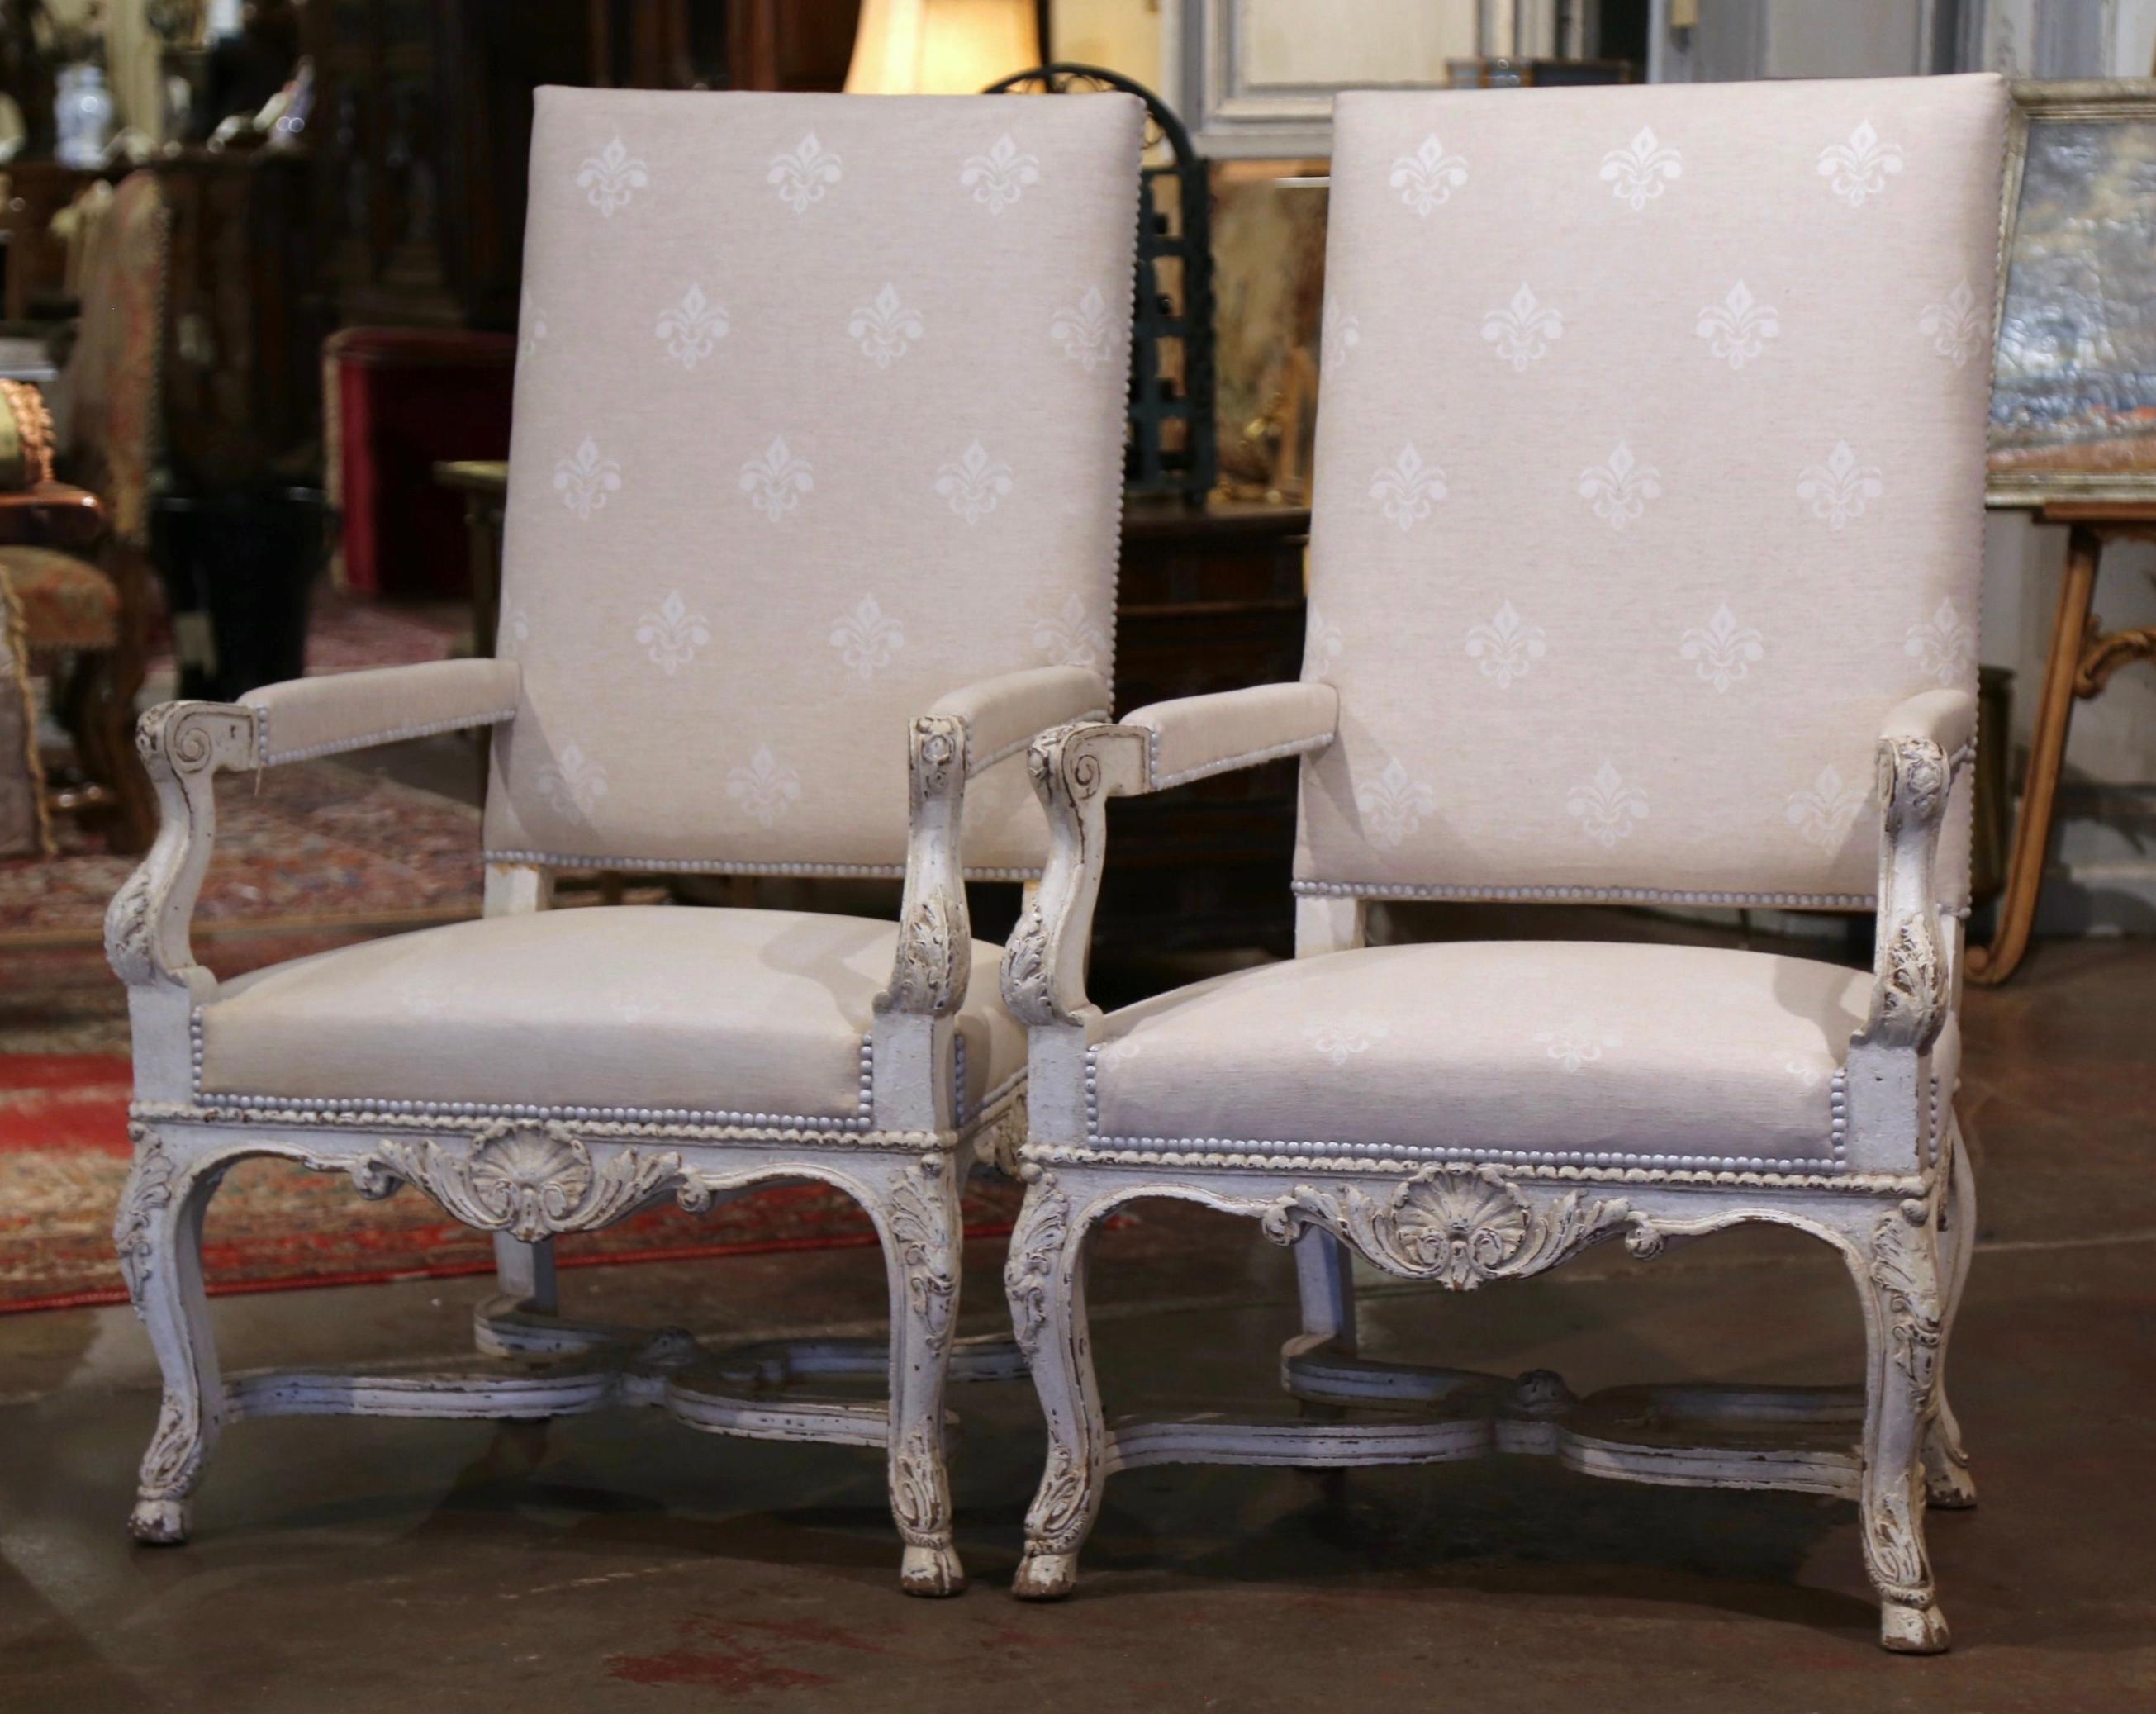 Pair of 19th Century Louis XIV Carved Painted Armchairs with Fleur-de-Lys Fabric 1